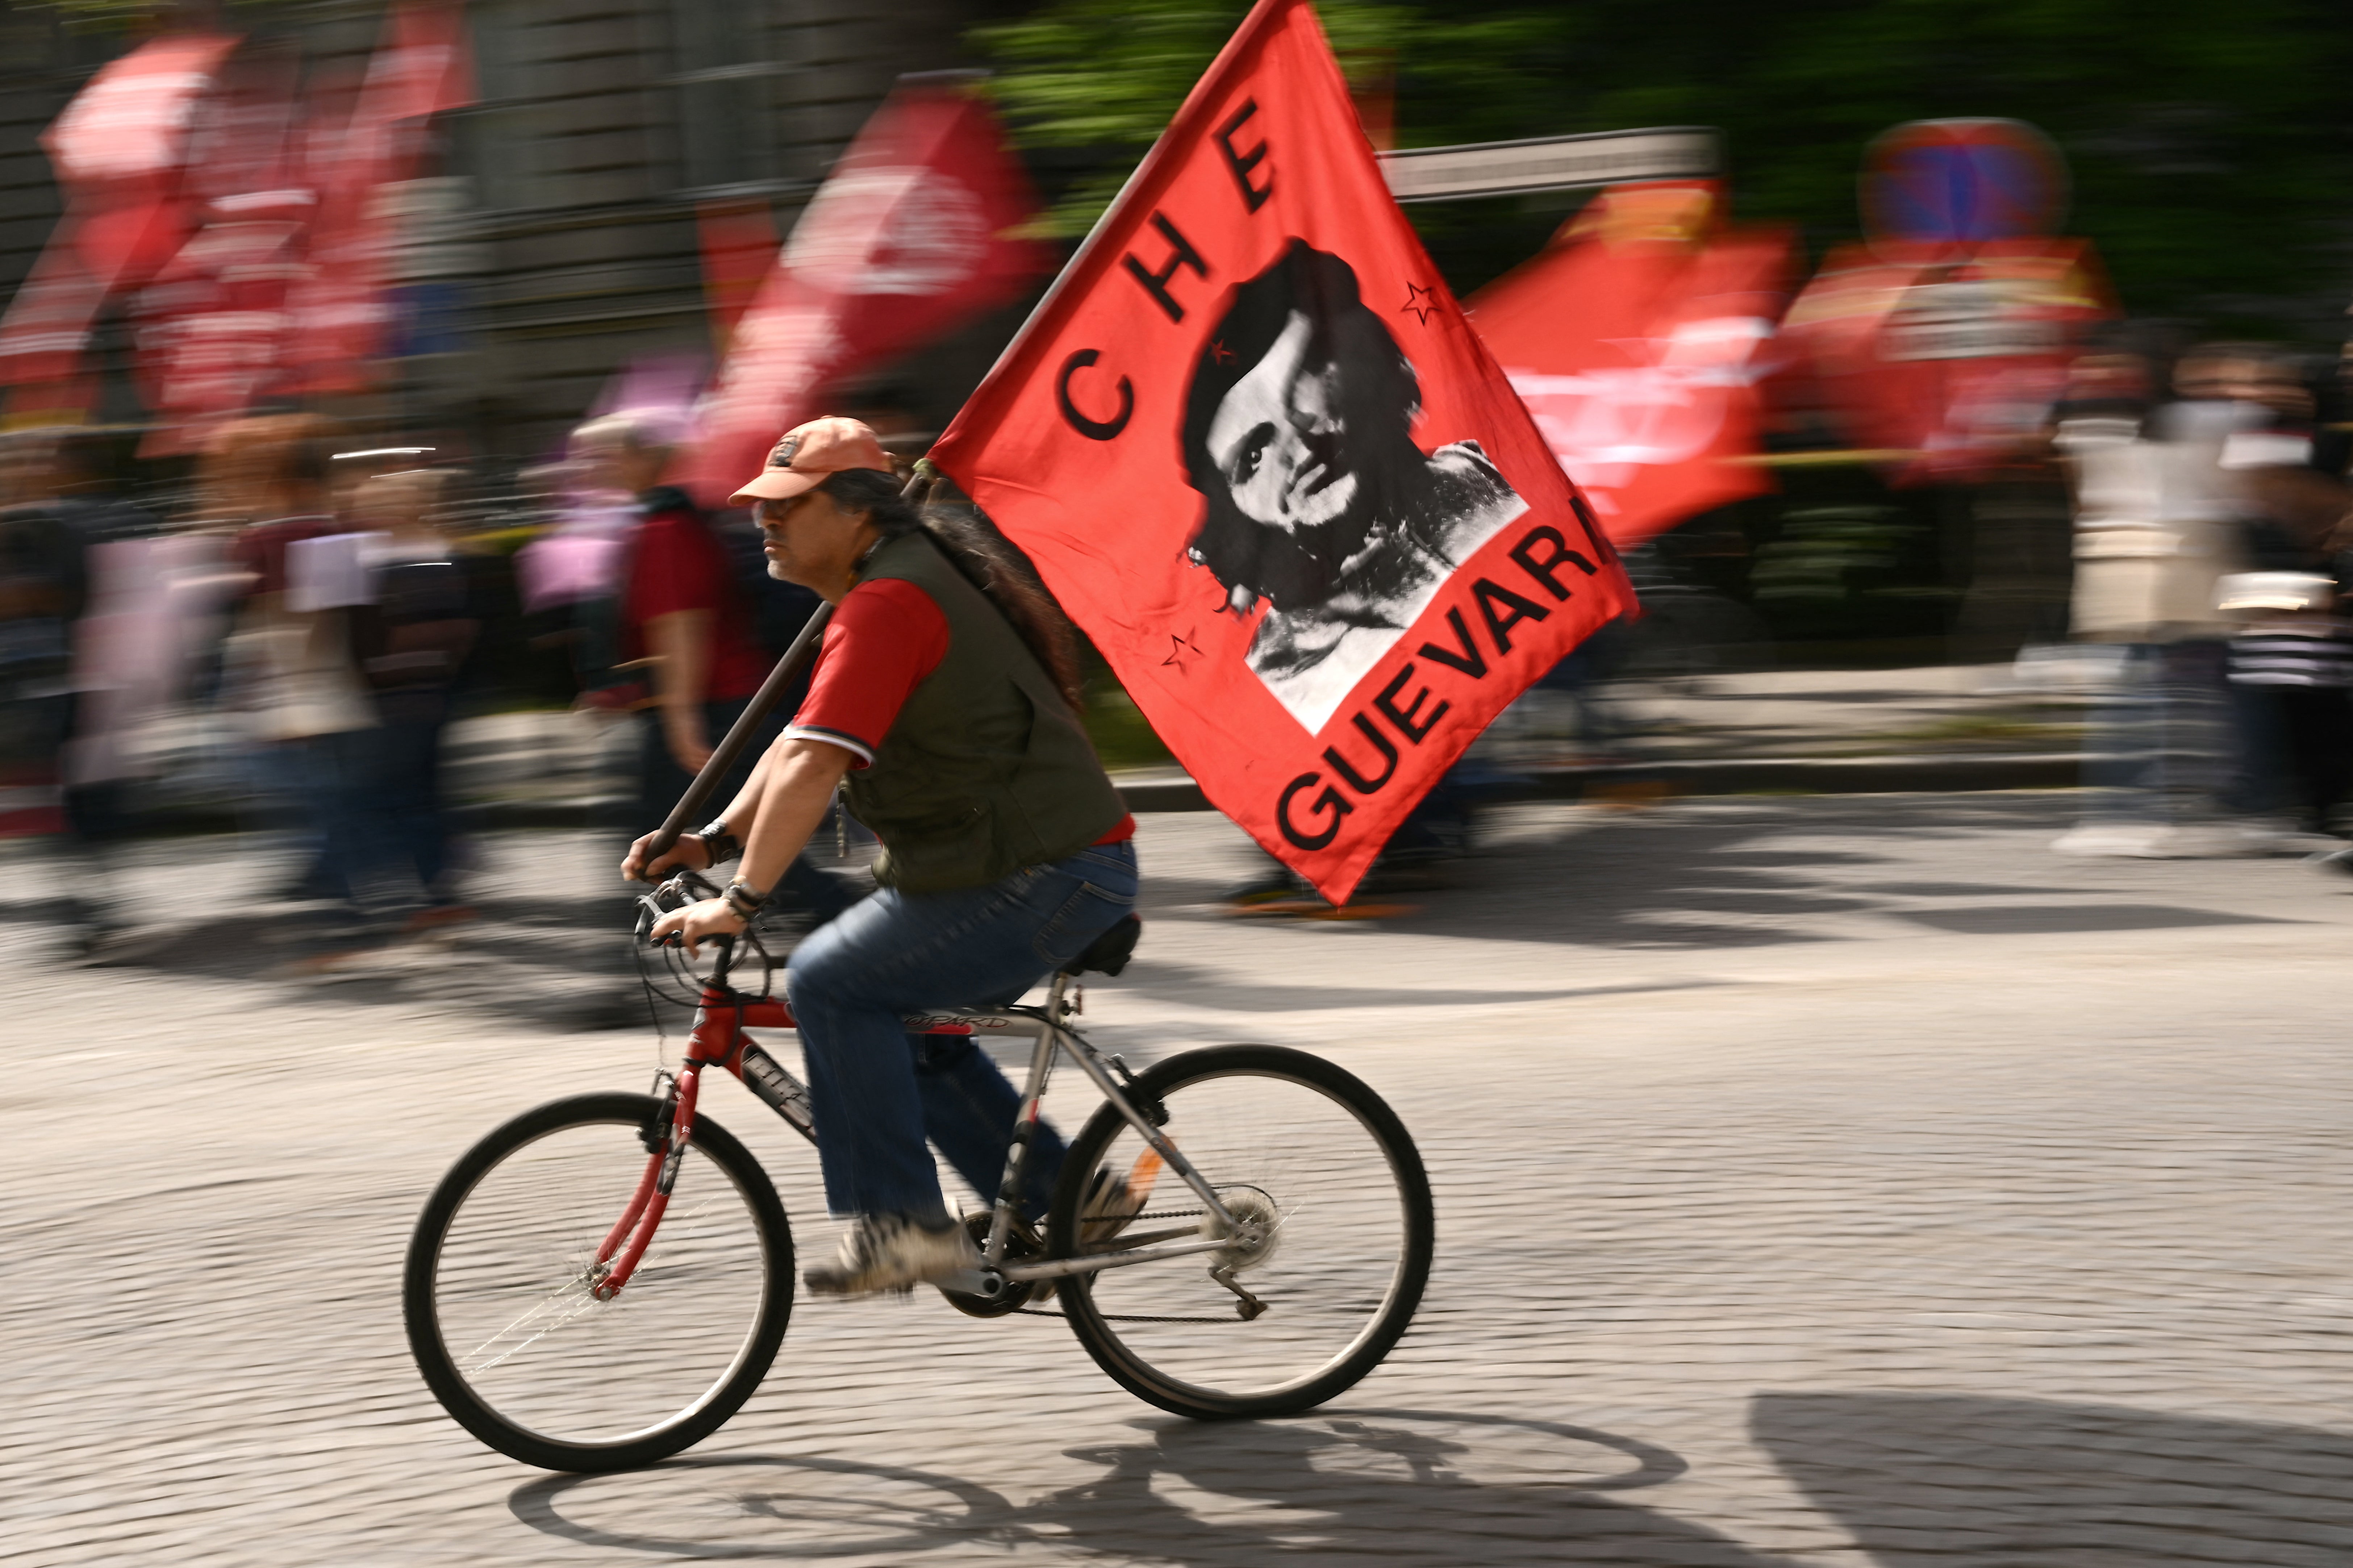 A protester on a bicycle waving a flag depicting Argentinian revolutionary Che Guevara during an International Workers’ Day demonstration in Strasbourg, France, on 1 May 2024